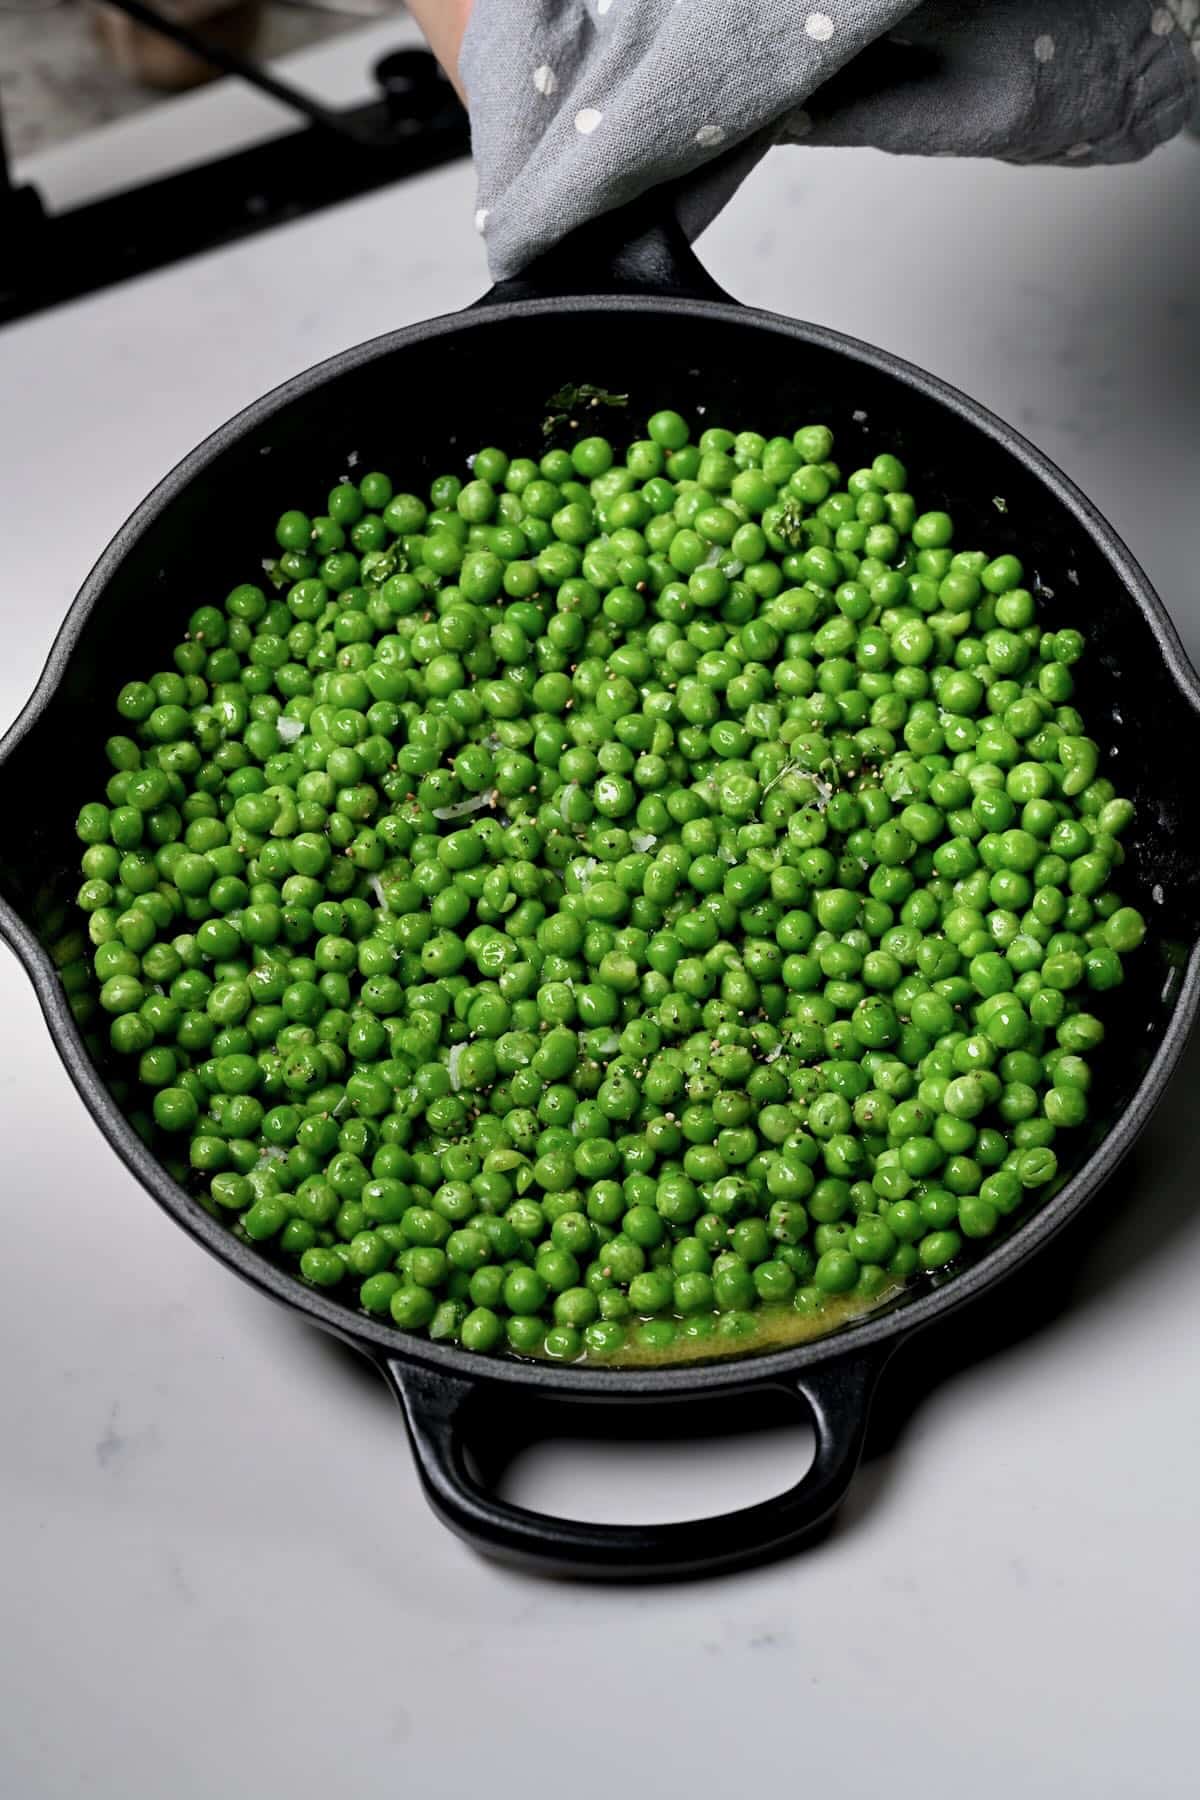 Sauteed green peas in a large skillet